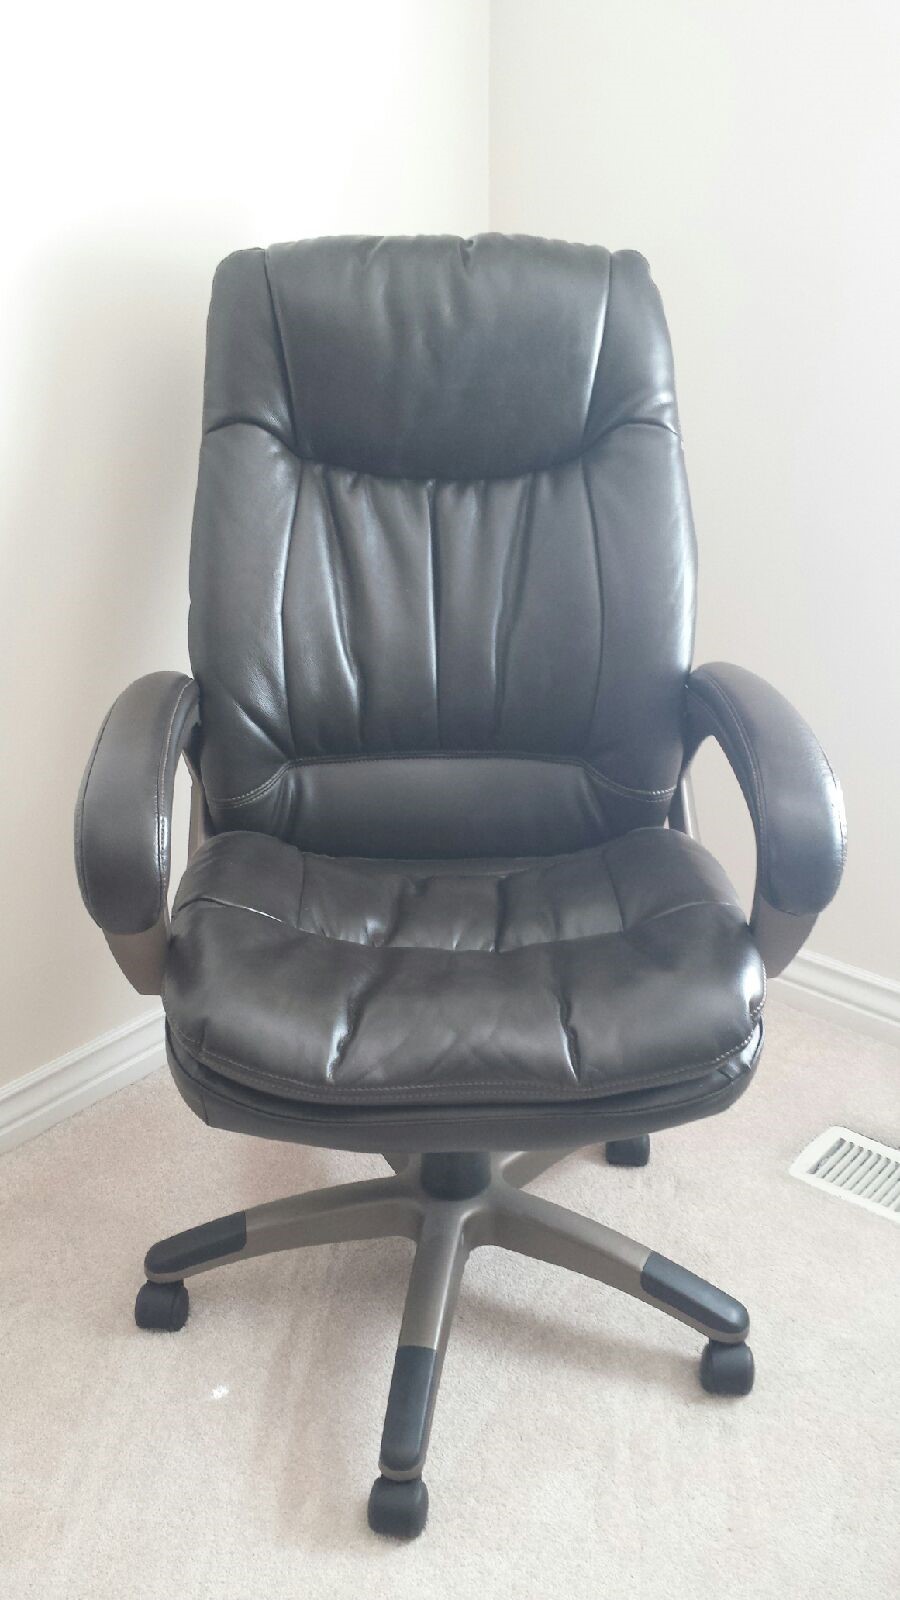 Deluxe brown leather office chair, like new